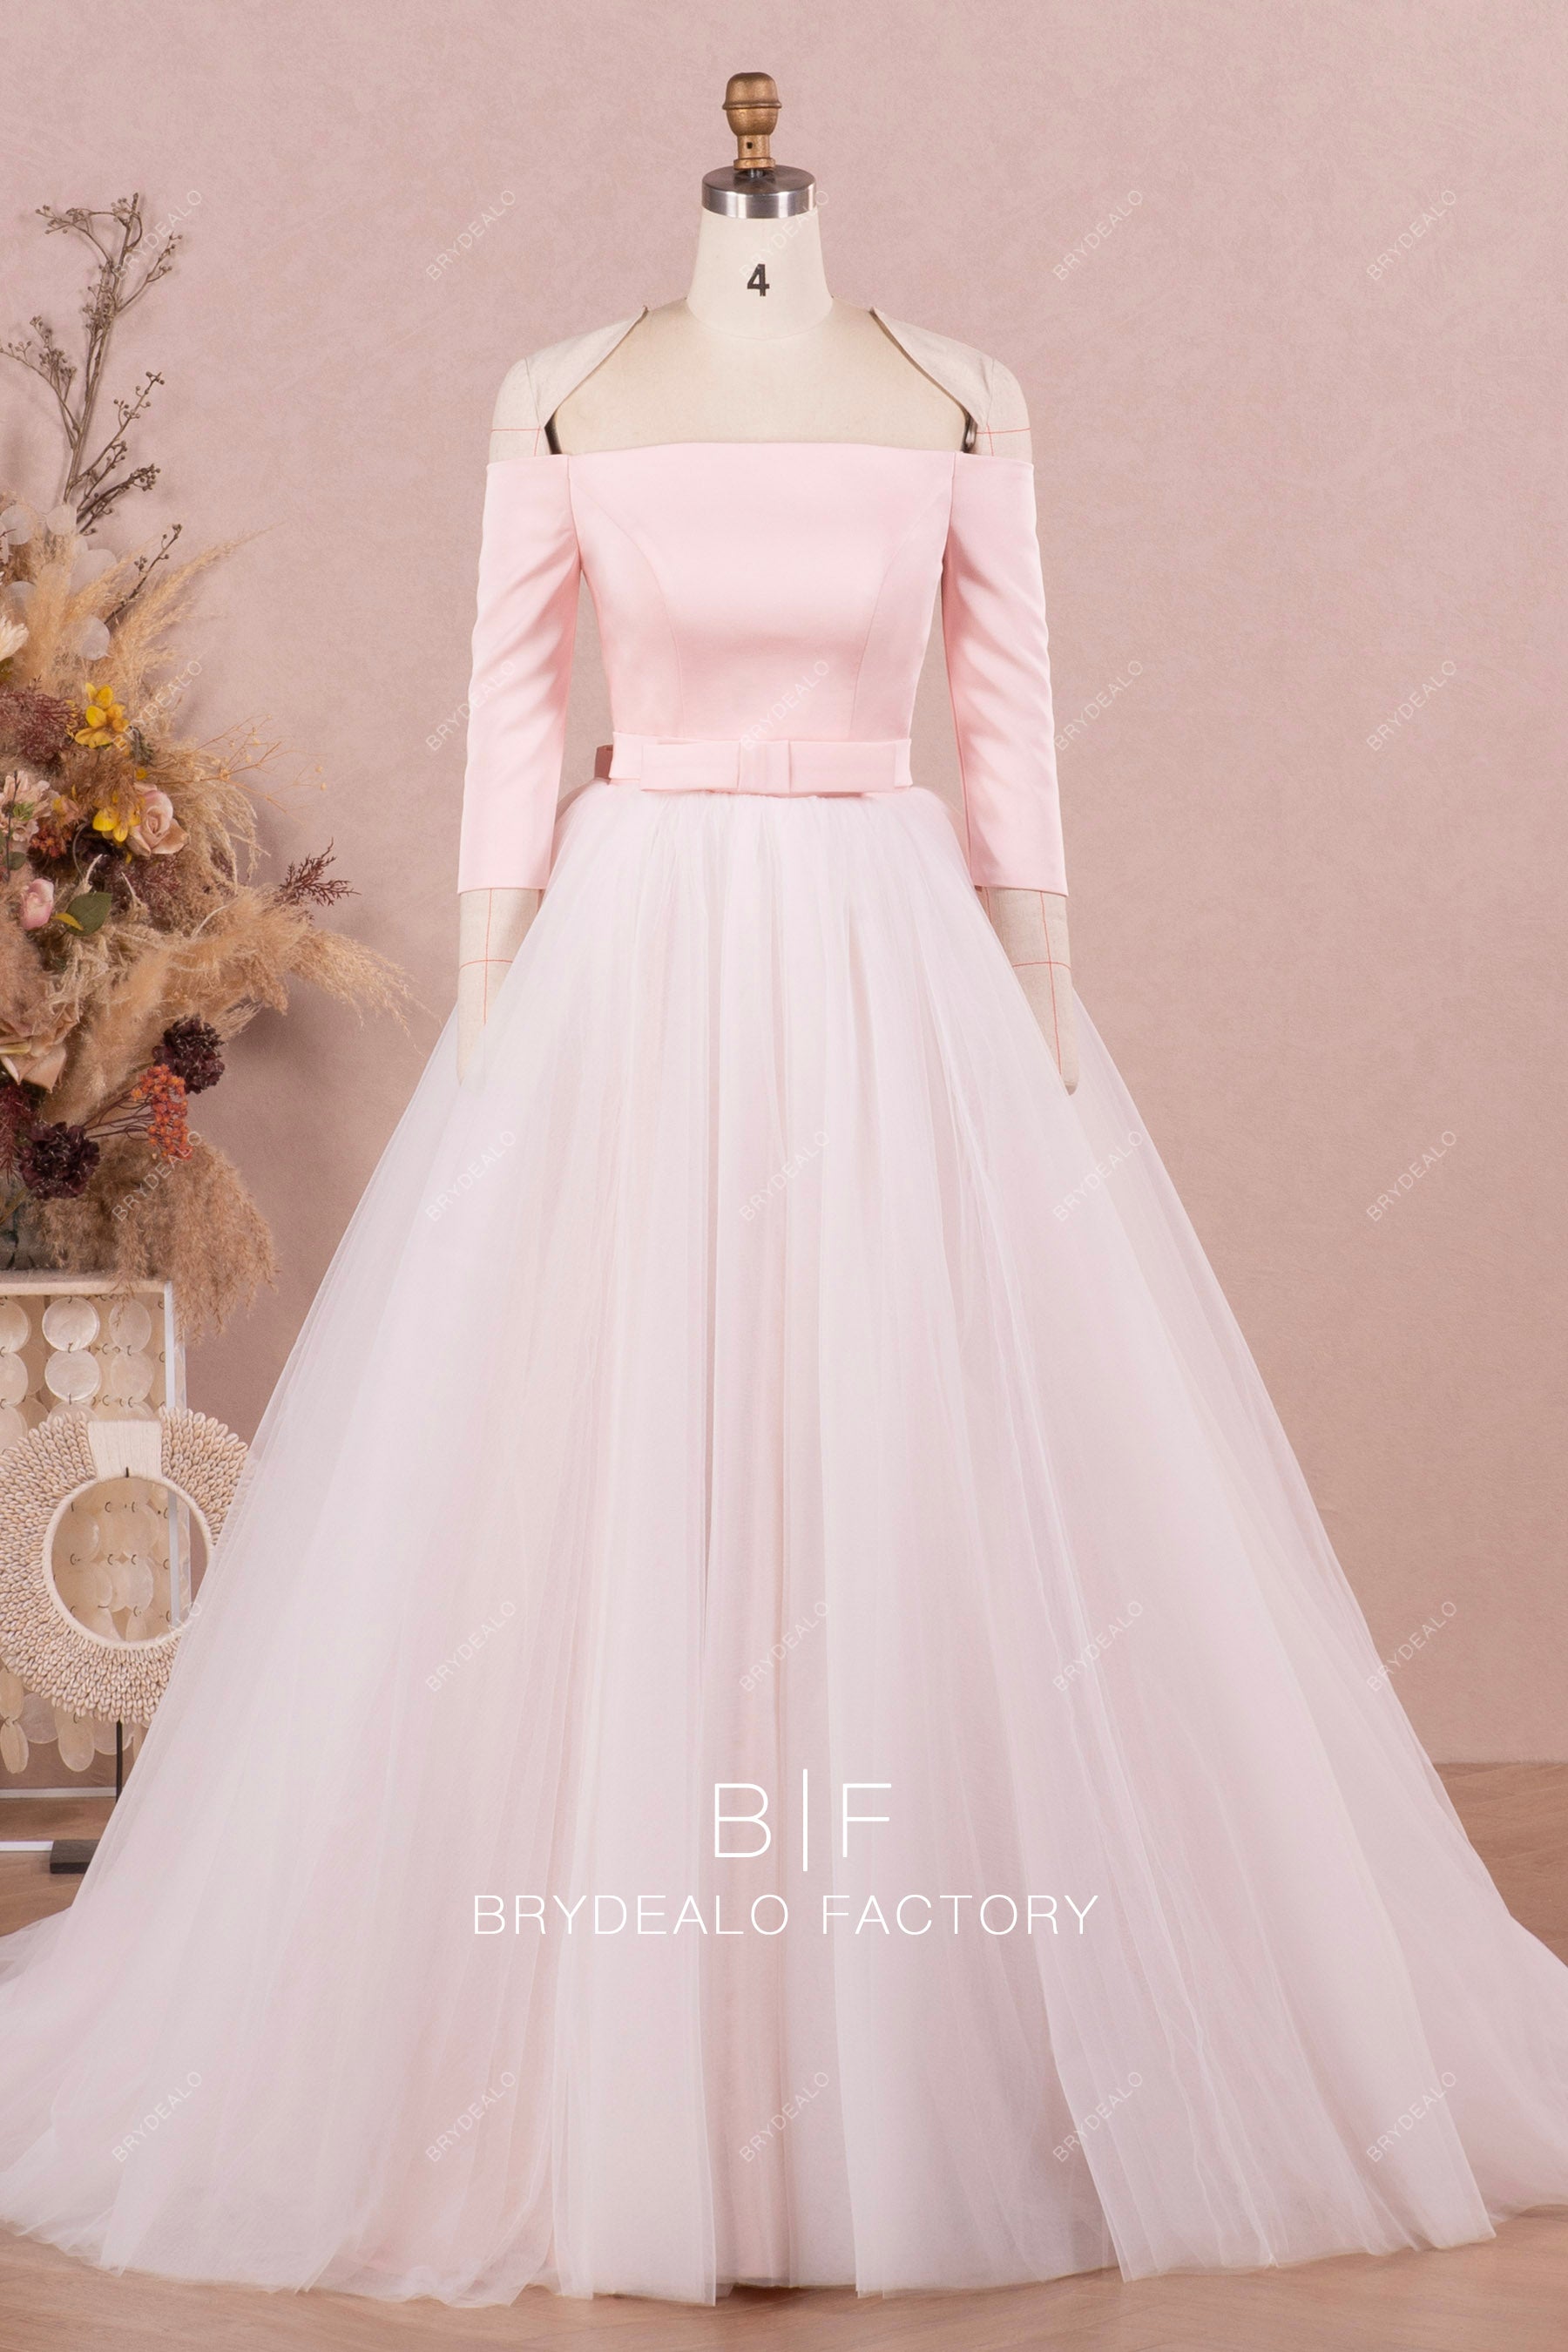 off shoulder sleeved wedding dress with puffy overskirt